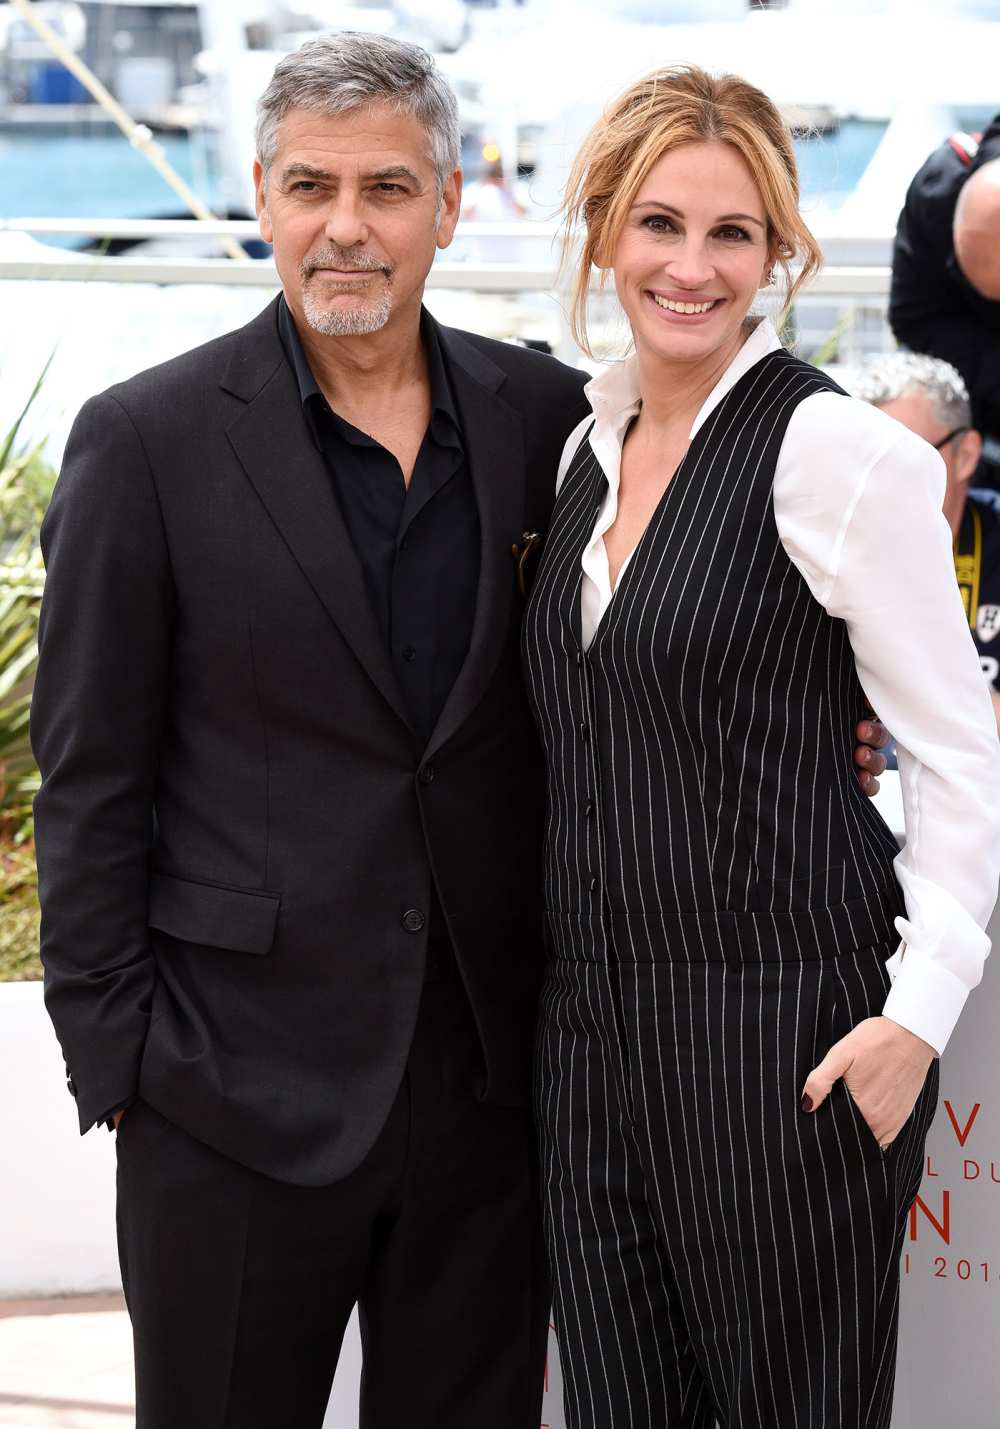 https://www.usmagazine.com/wp-content/uploads/2022/06/Julia-Roberts-and-George-Clooney-Reunite-in-Ticket-to-Paradise5.jpg?w=1000&quality=55&strip=all